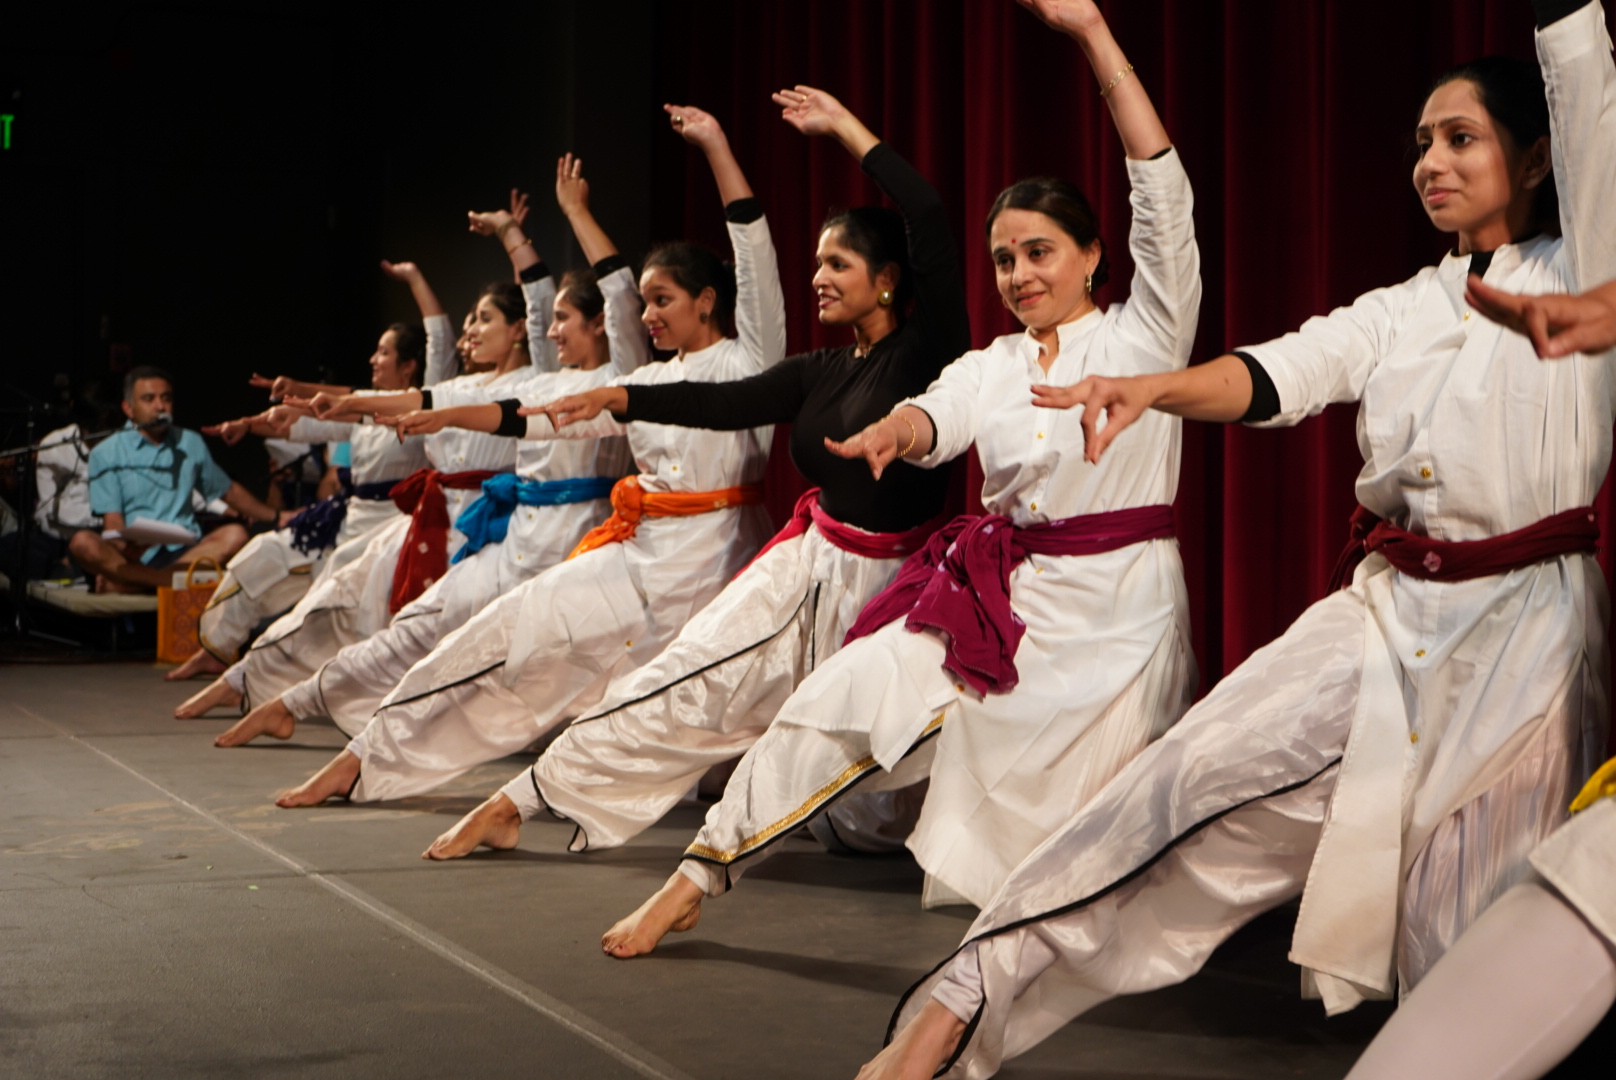 Original music and dance feature prominently in "Gandhi: The Musical" put on by Silicon Valley-based Naatak.